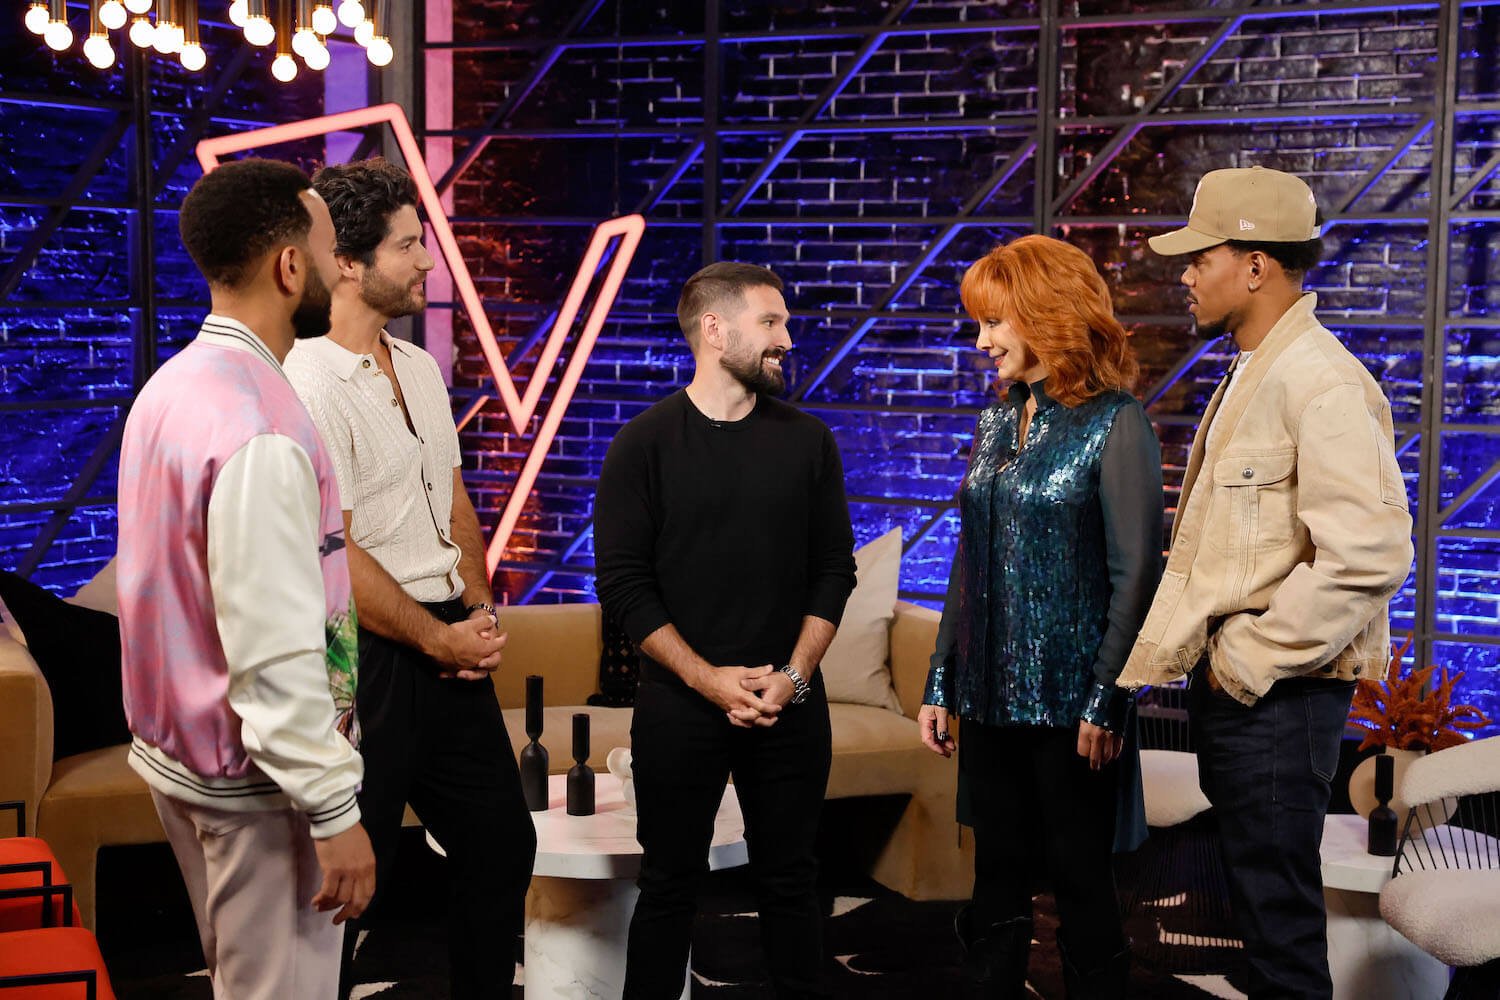 'The Voice' Season 25 coaches John Legend, Dan + Shay, Reba McEntire, and Chance the Rapper standing and talking to each other on the set of the show